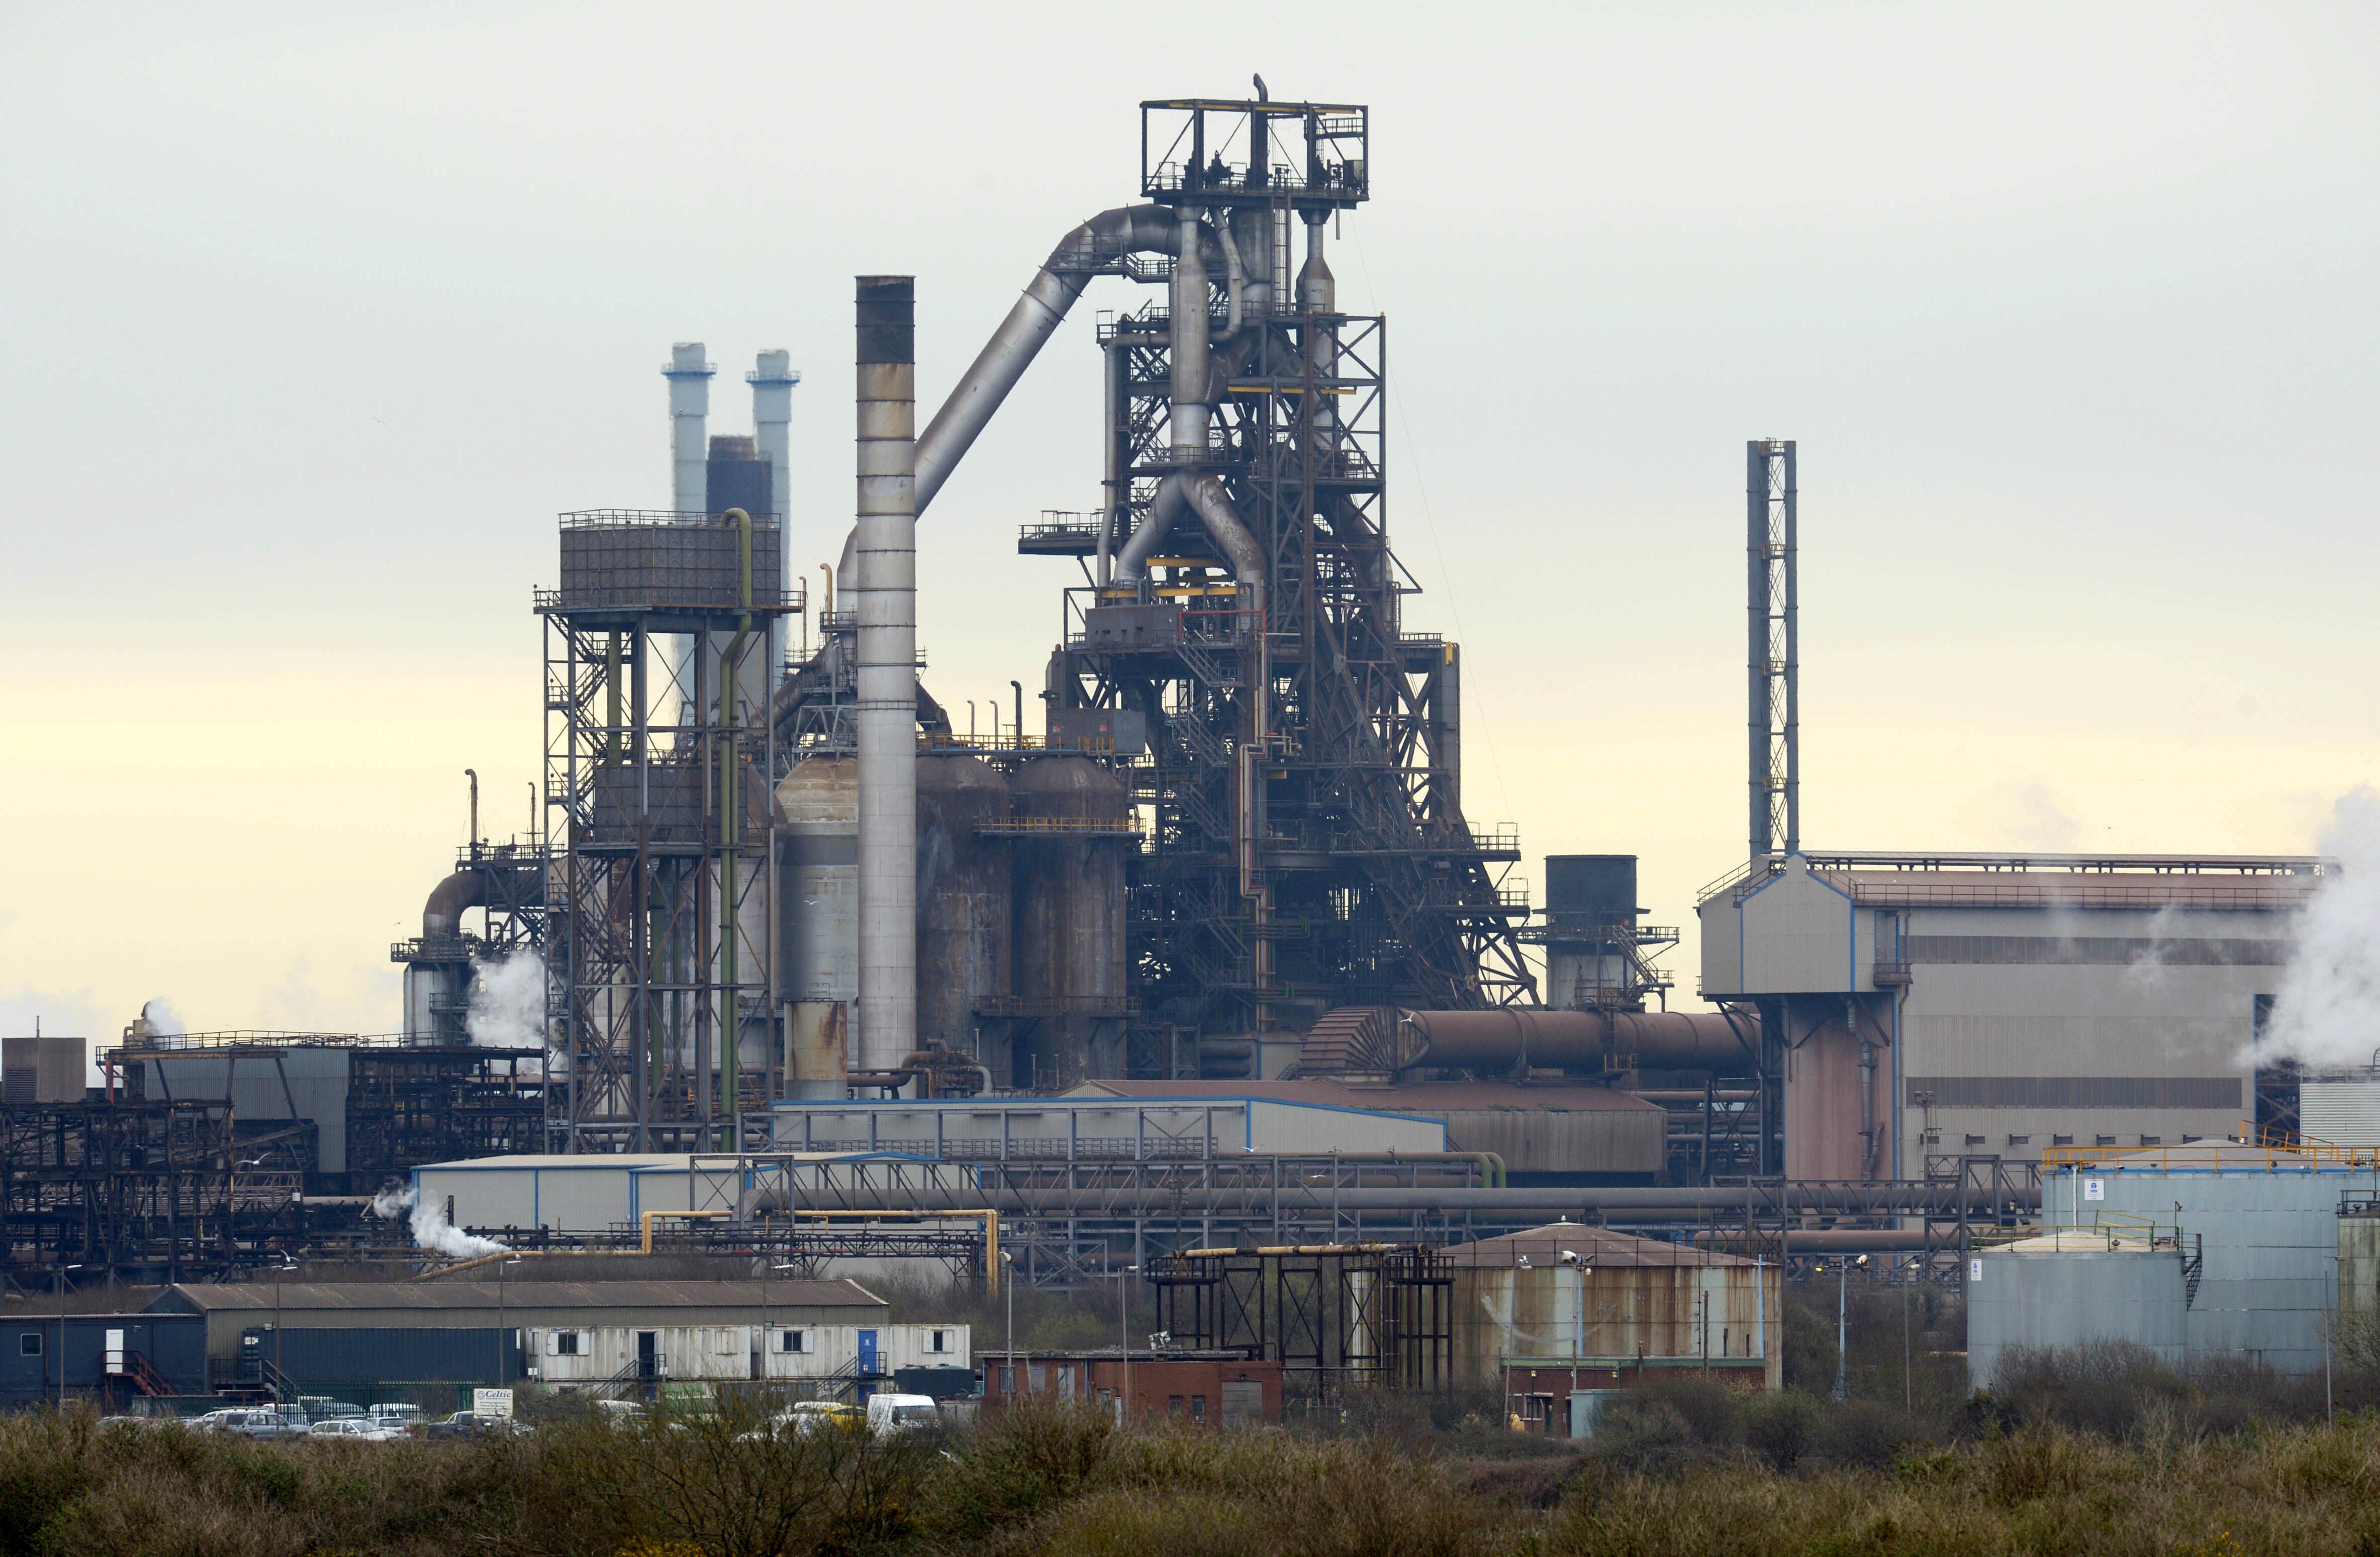 The UK’s largest steel works in Port Talbot, South Wales